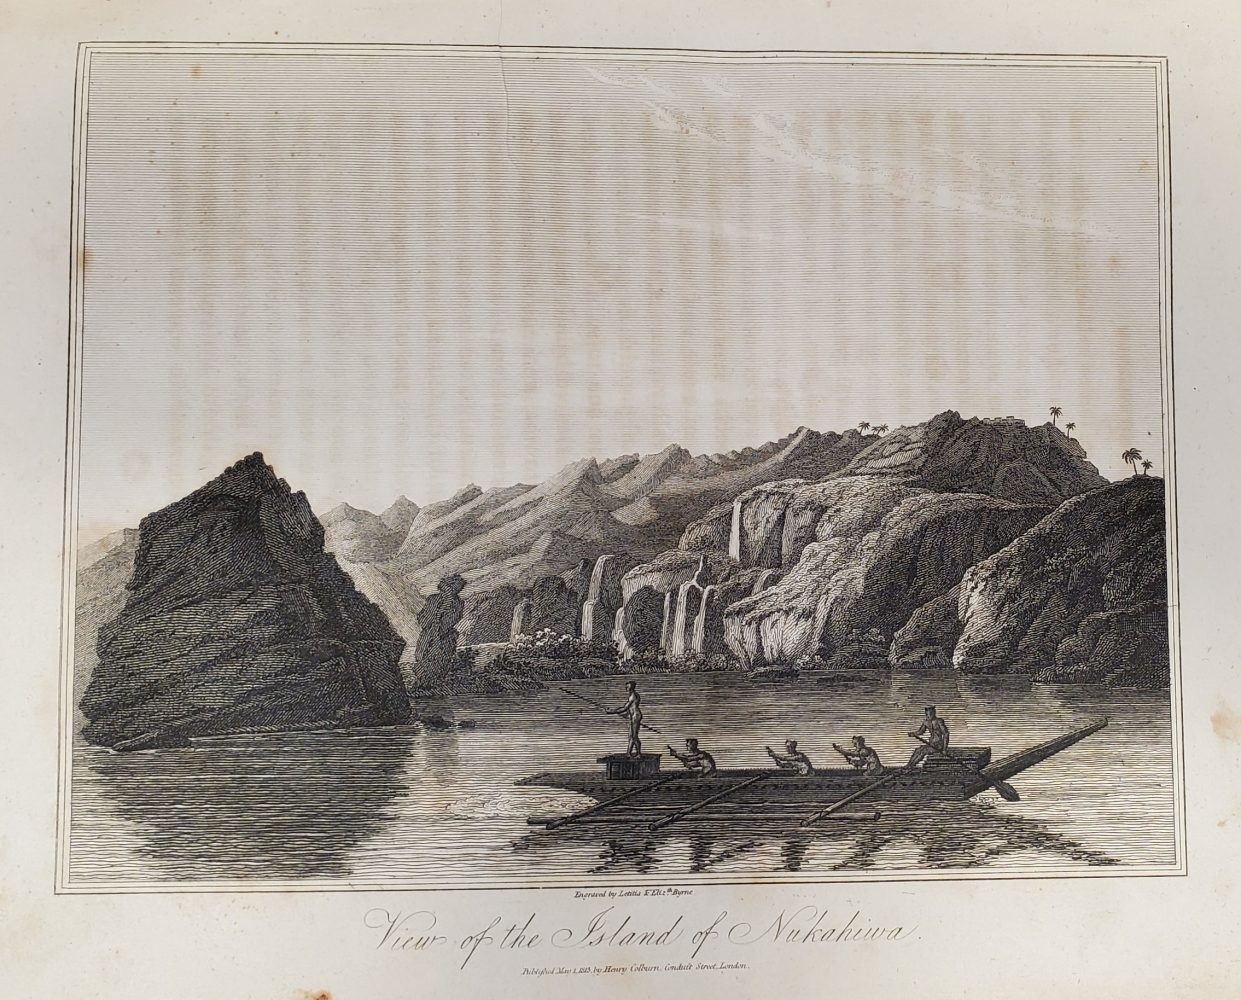 Island profile with canoe in the foreground. Five rowers; one standing on an elevated platform at the front.